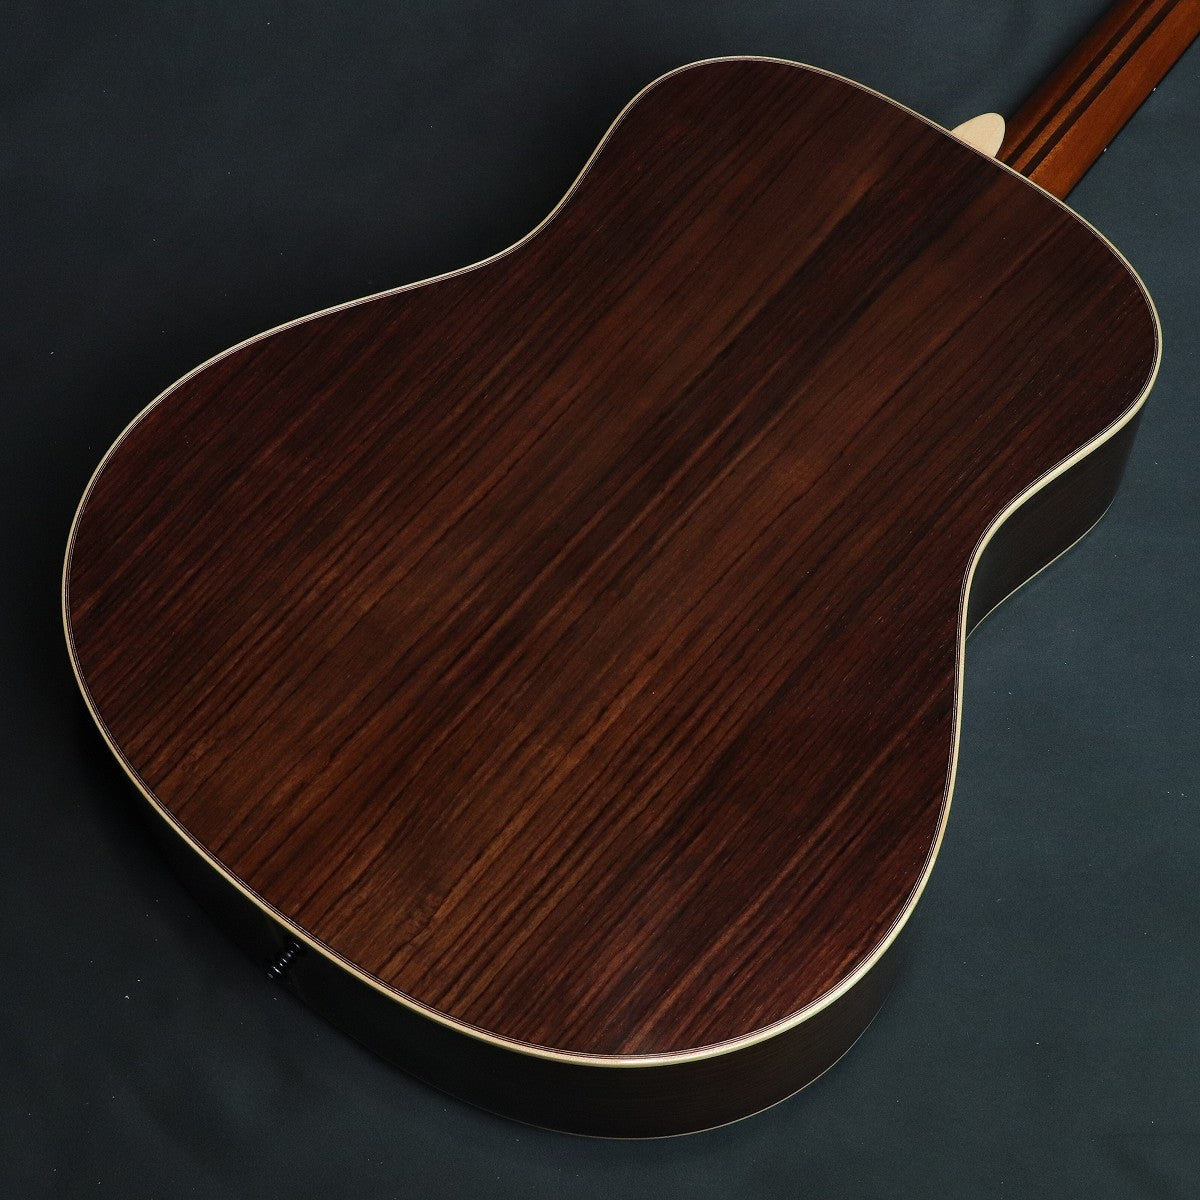 [SN IJP034A] YAMAHA / LL26 ARE Natural (NT) Handcrafted [09]